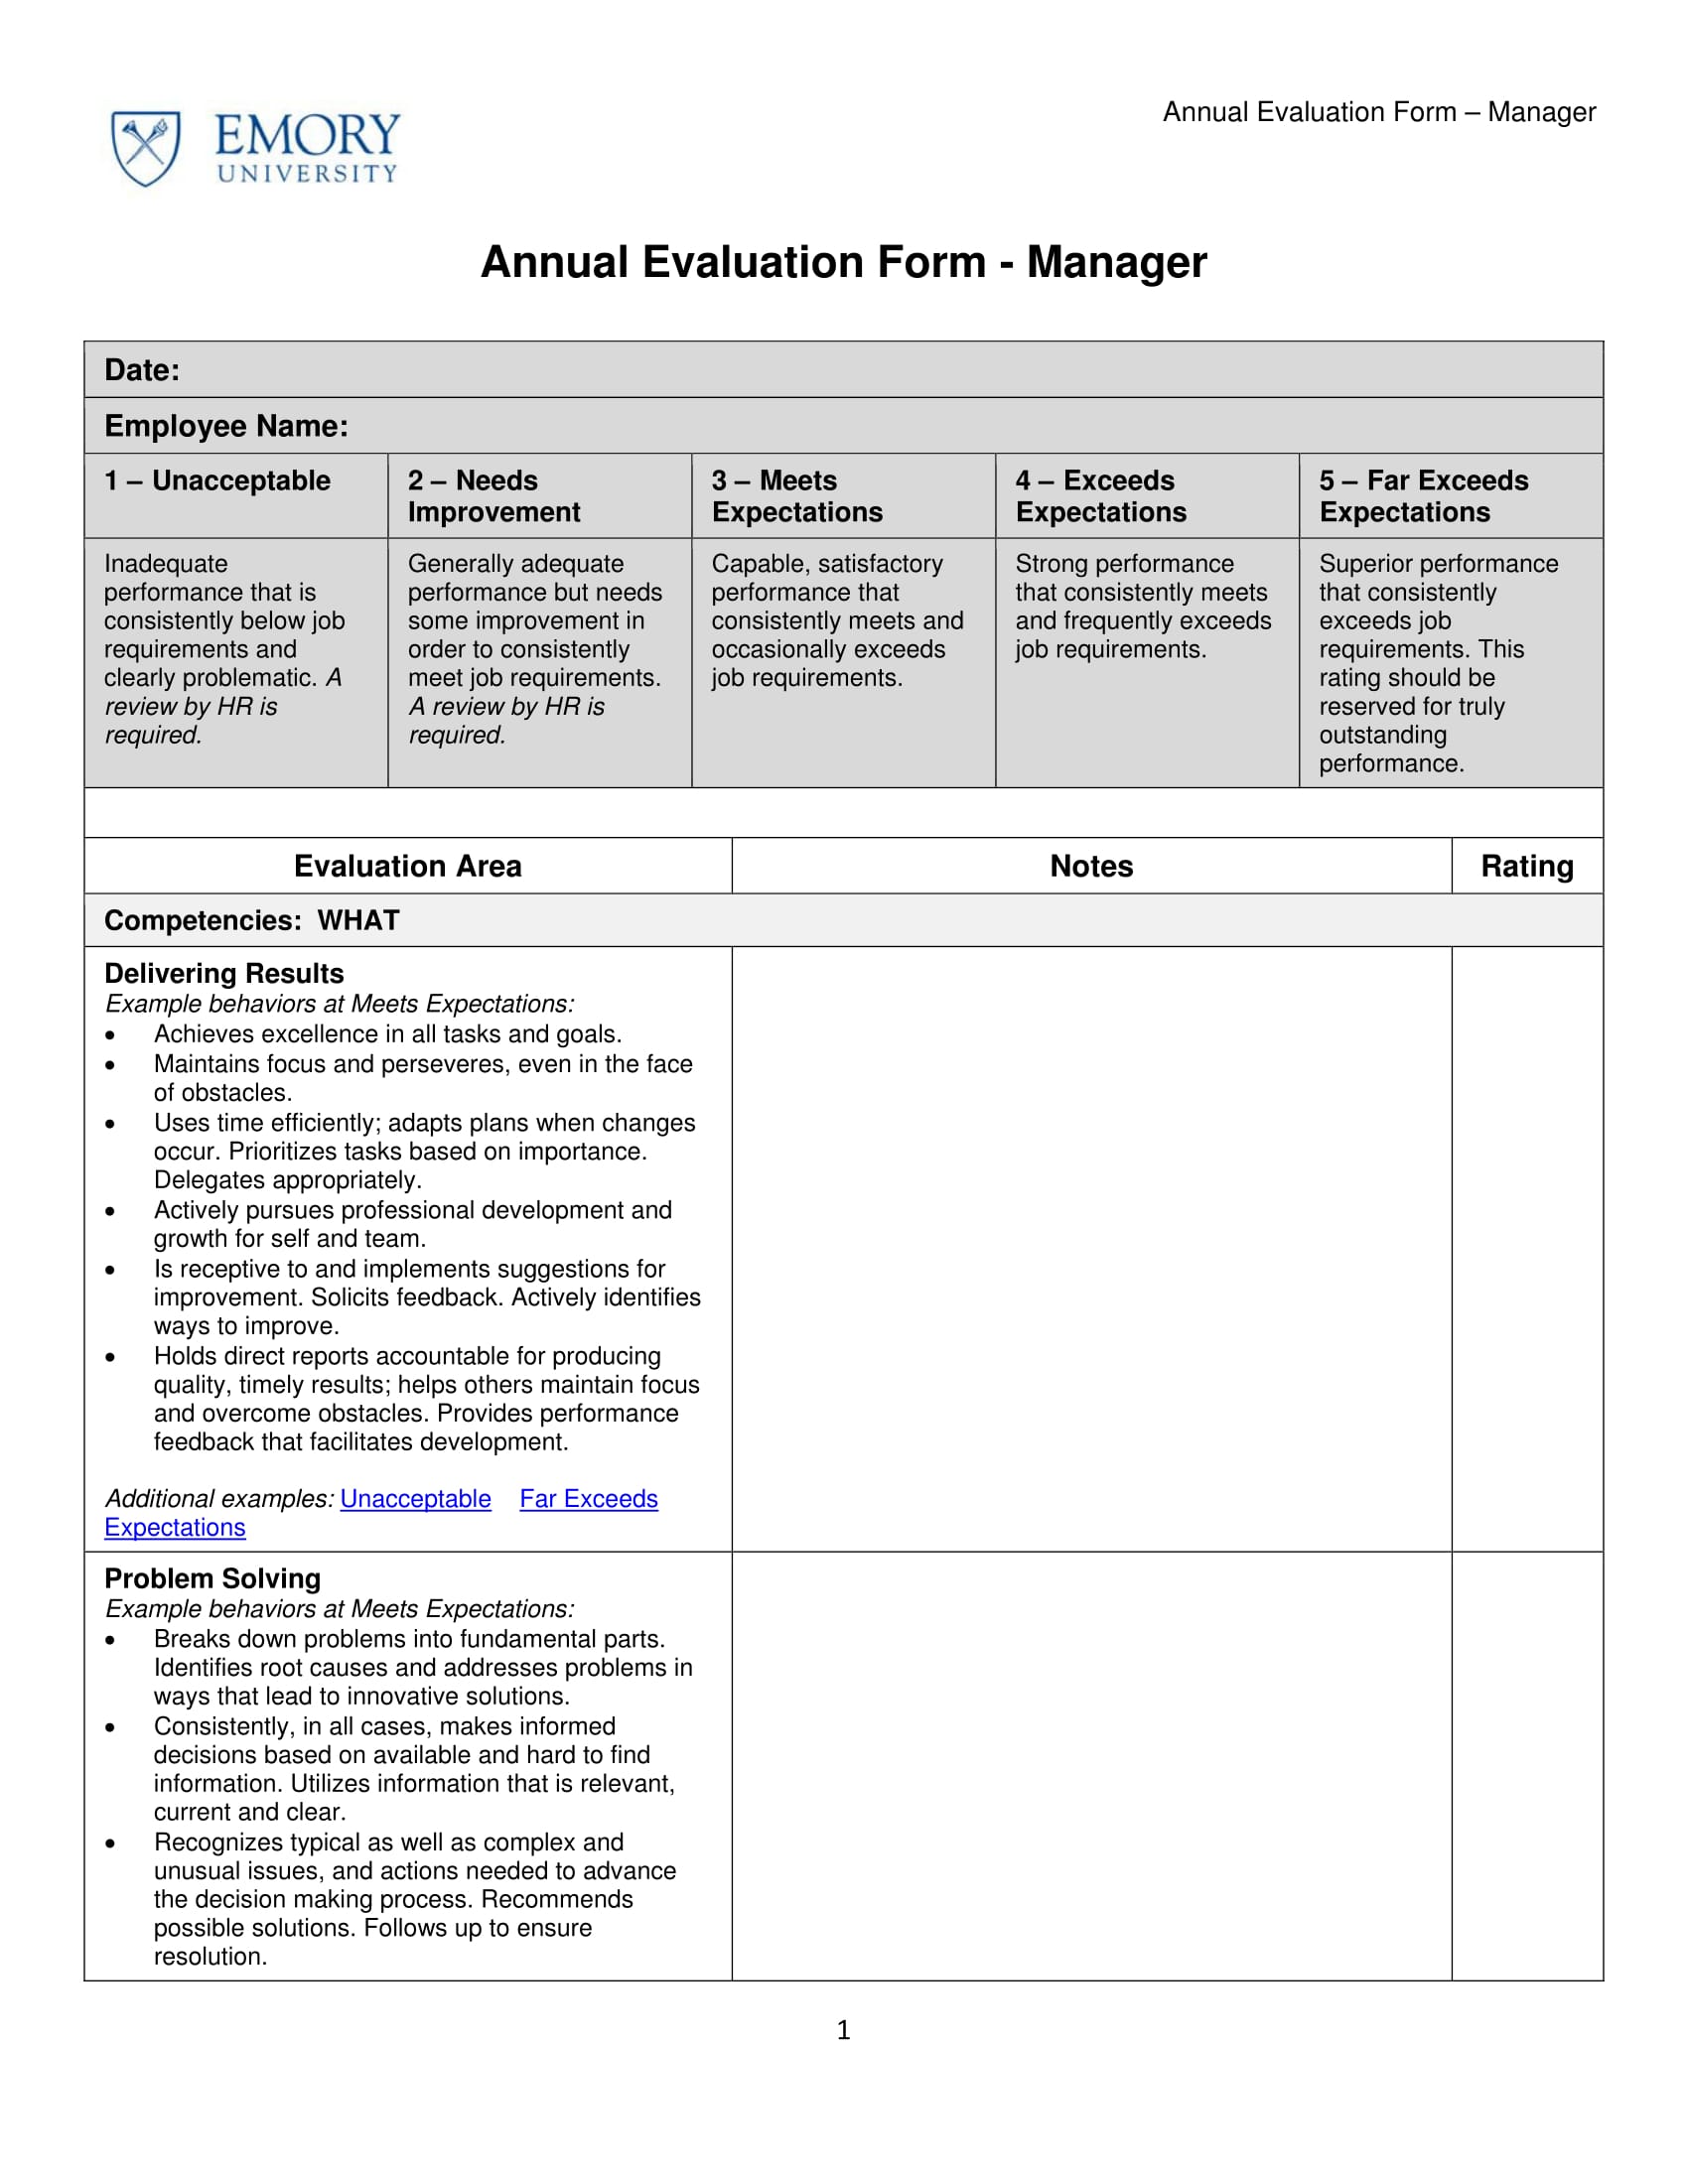 manager annual evaluation form 1